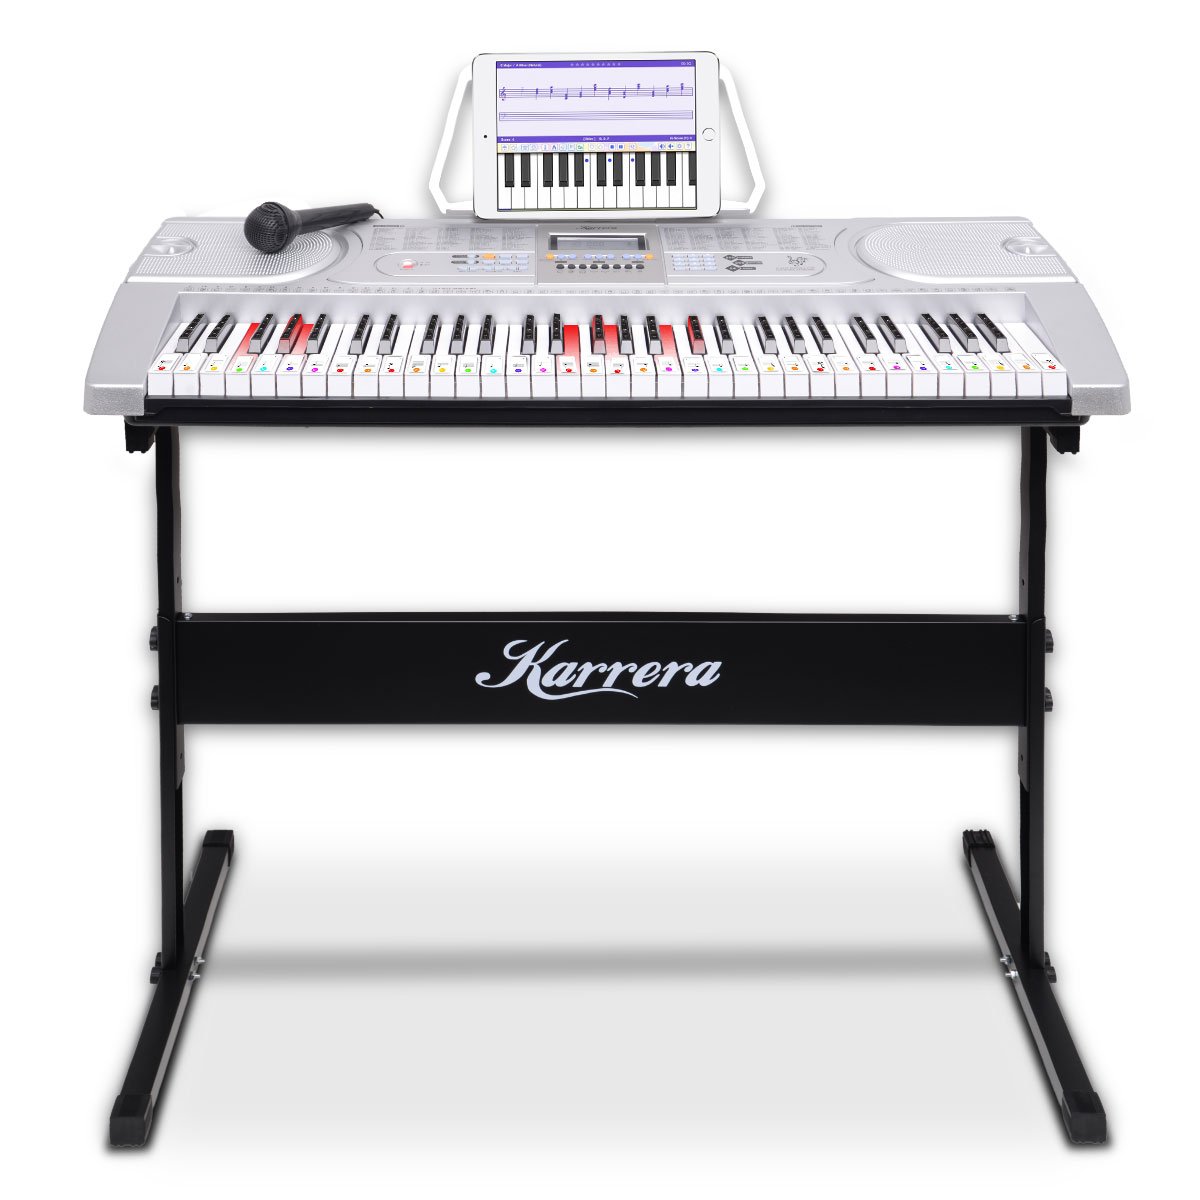 Karrera 61 Keys Electronic LED Keyboard Piano with Stand - Silver 2